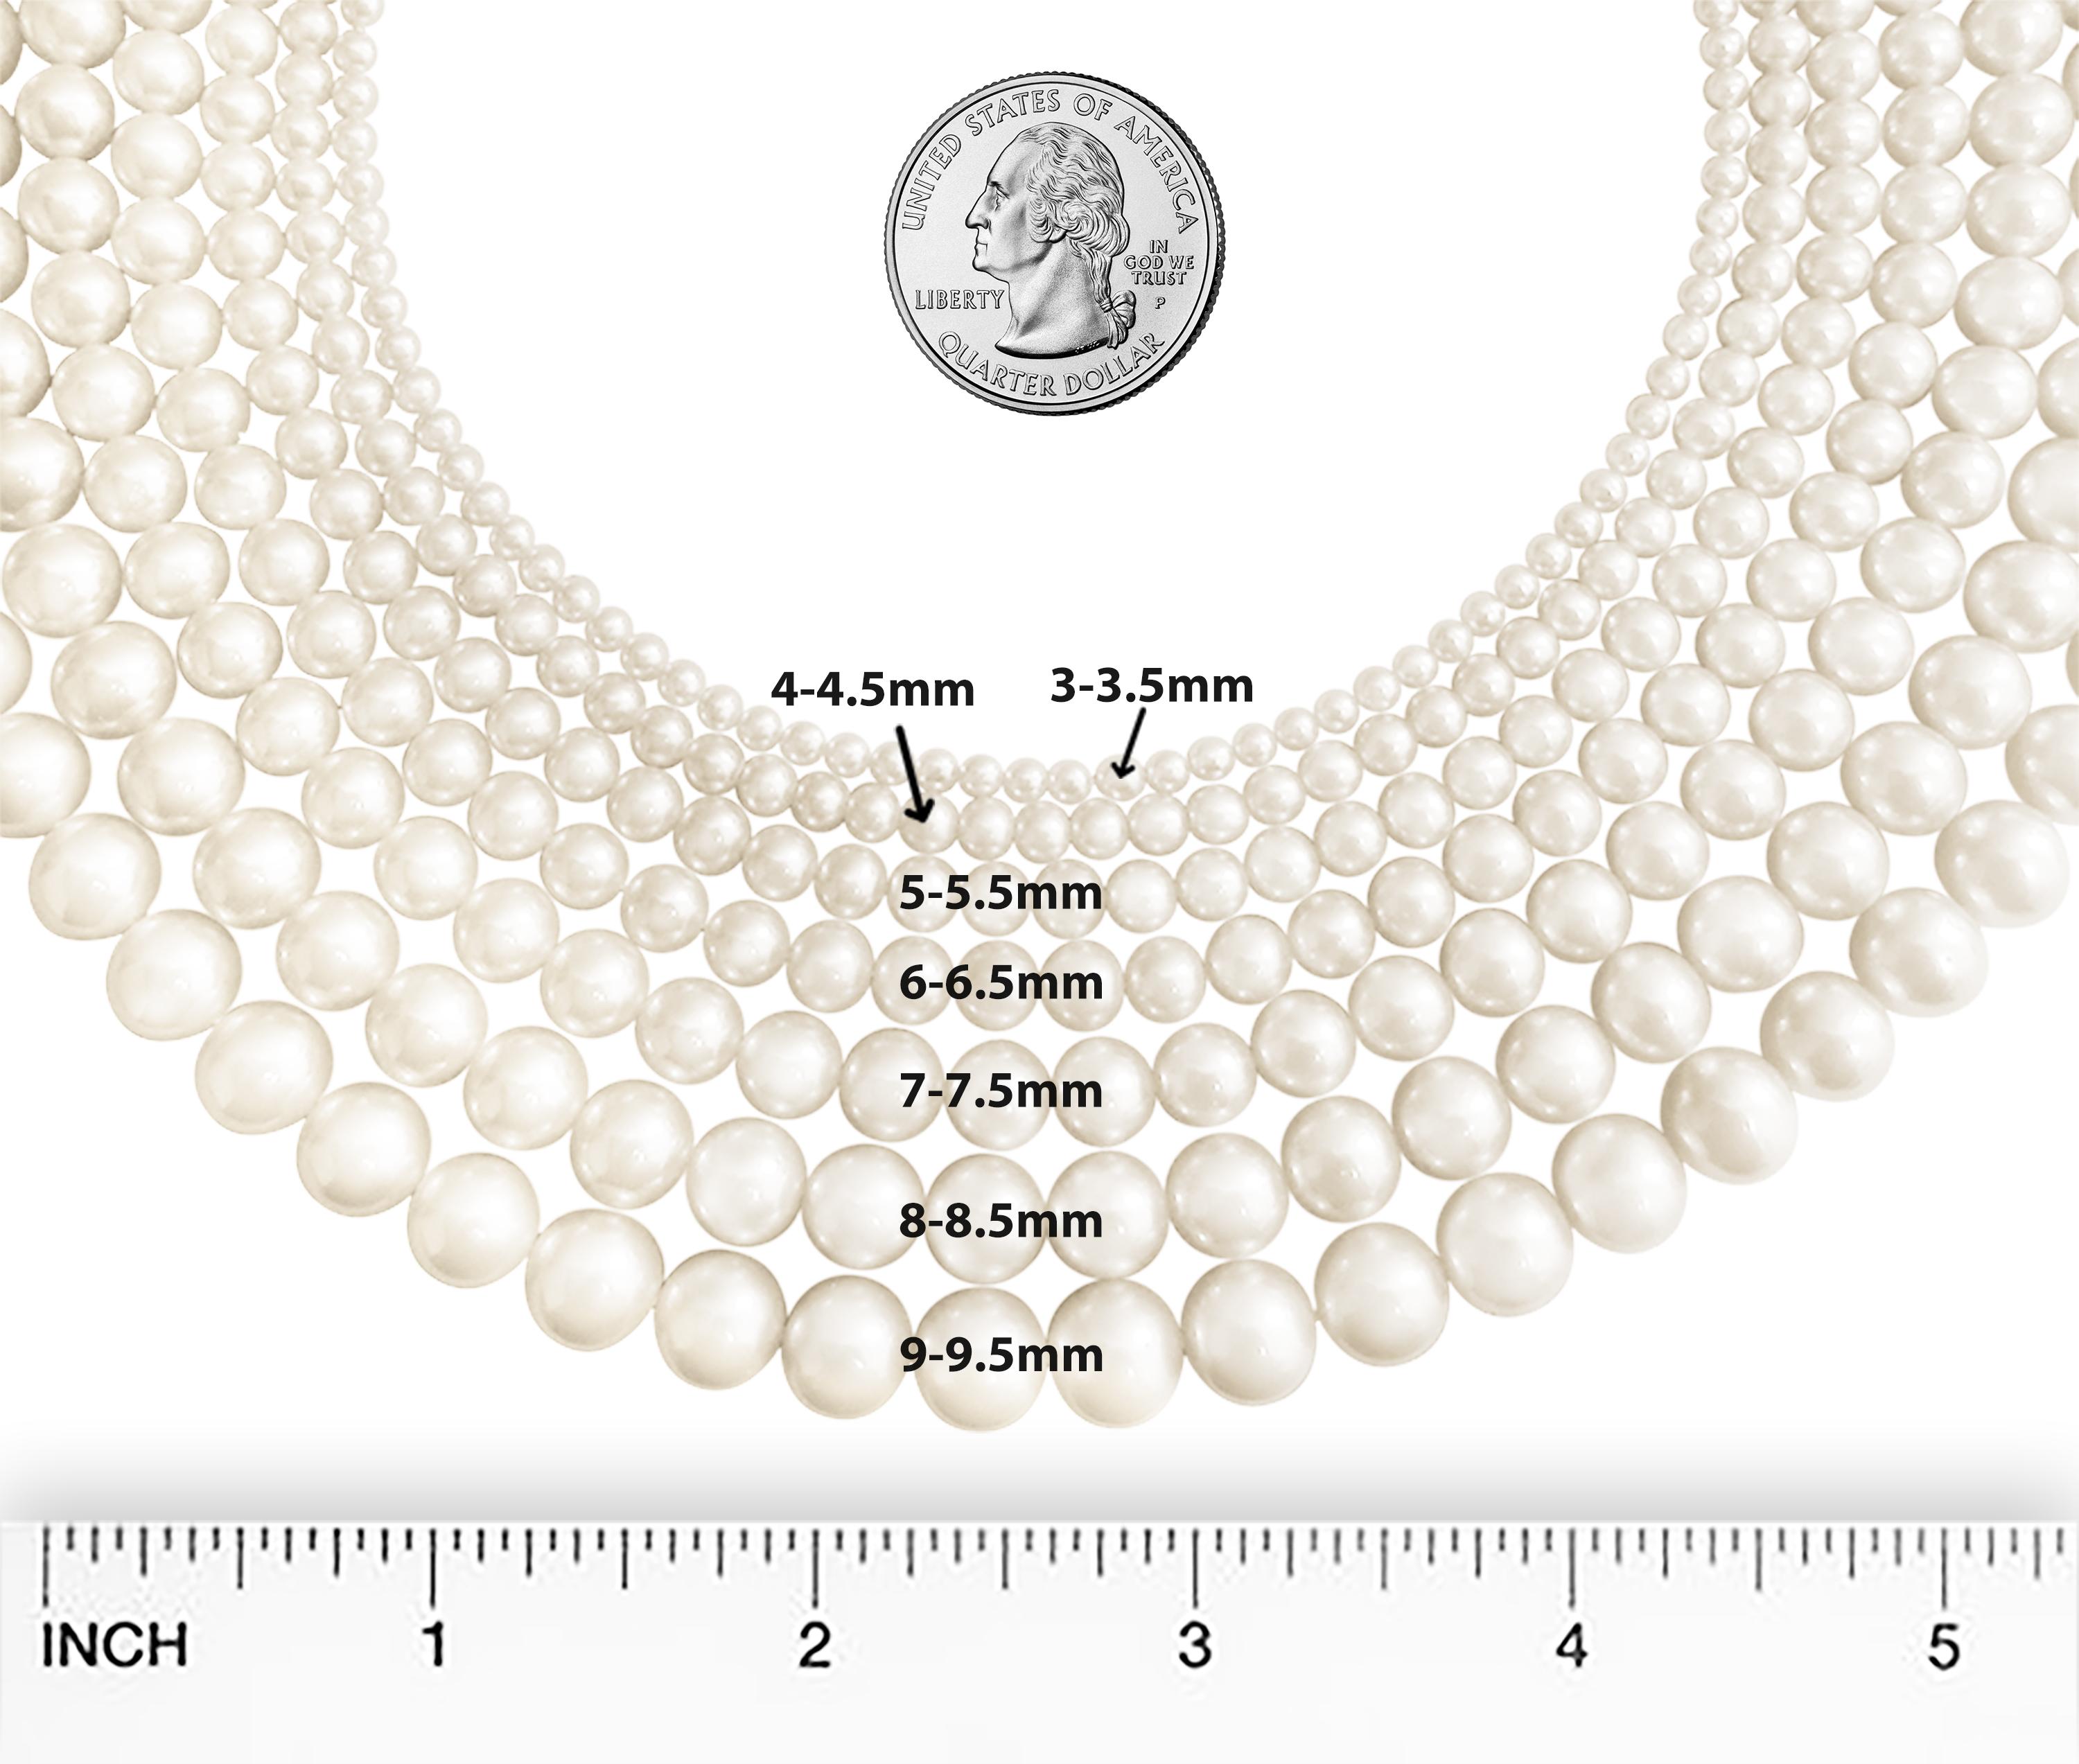 Uncut Japanese Akoya Cultured 7-7.5mm Pearl Necklace with 14K Gold Clasp For Sale